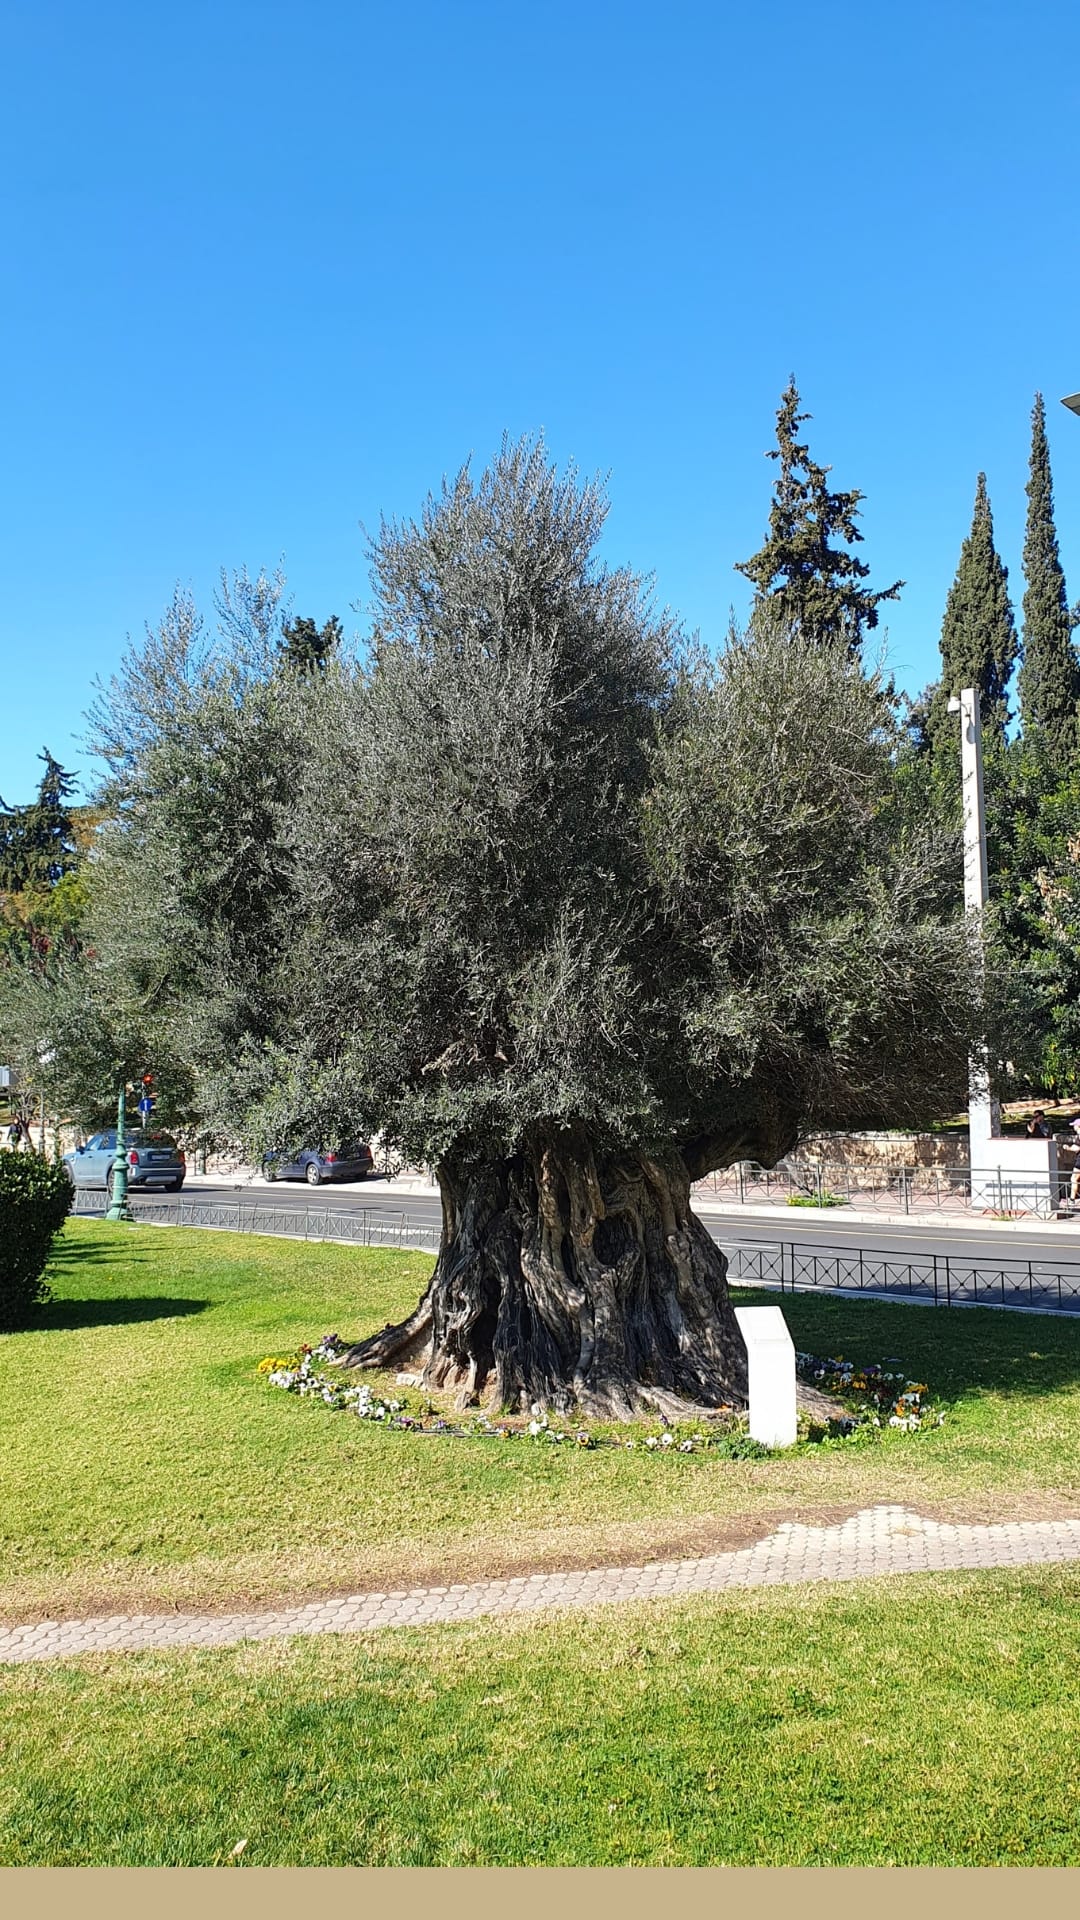 February: The Mediterranean Olive Tree throughout the Year